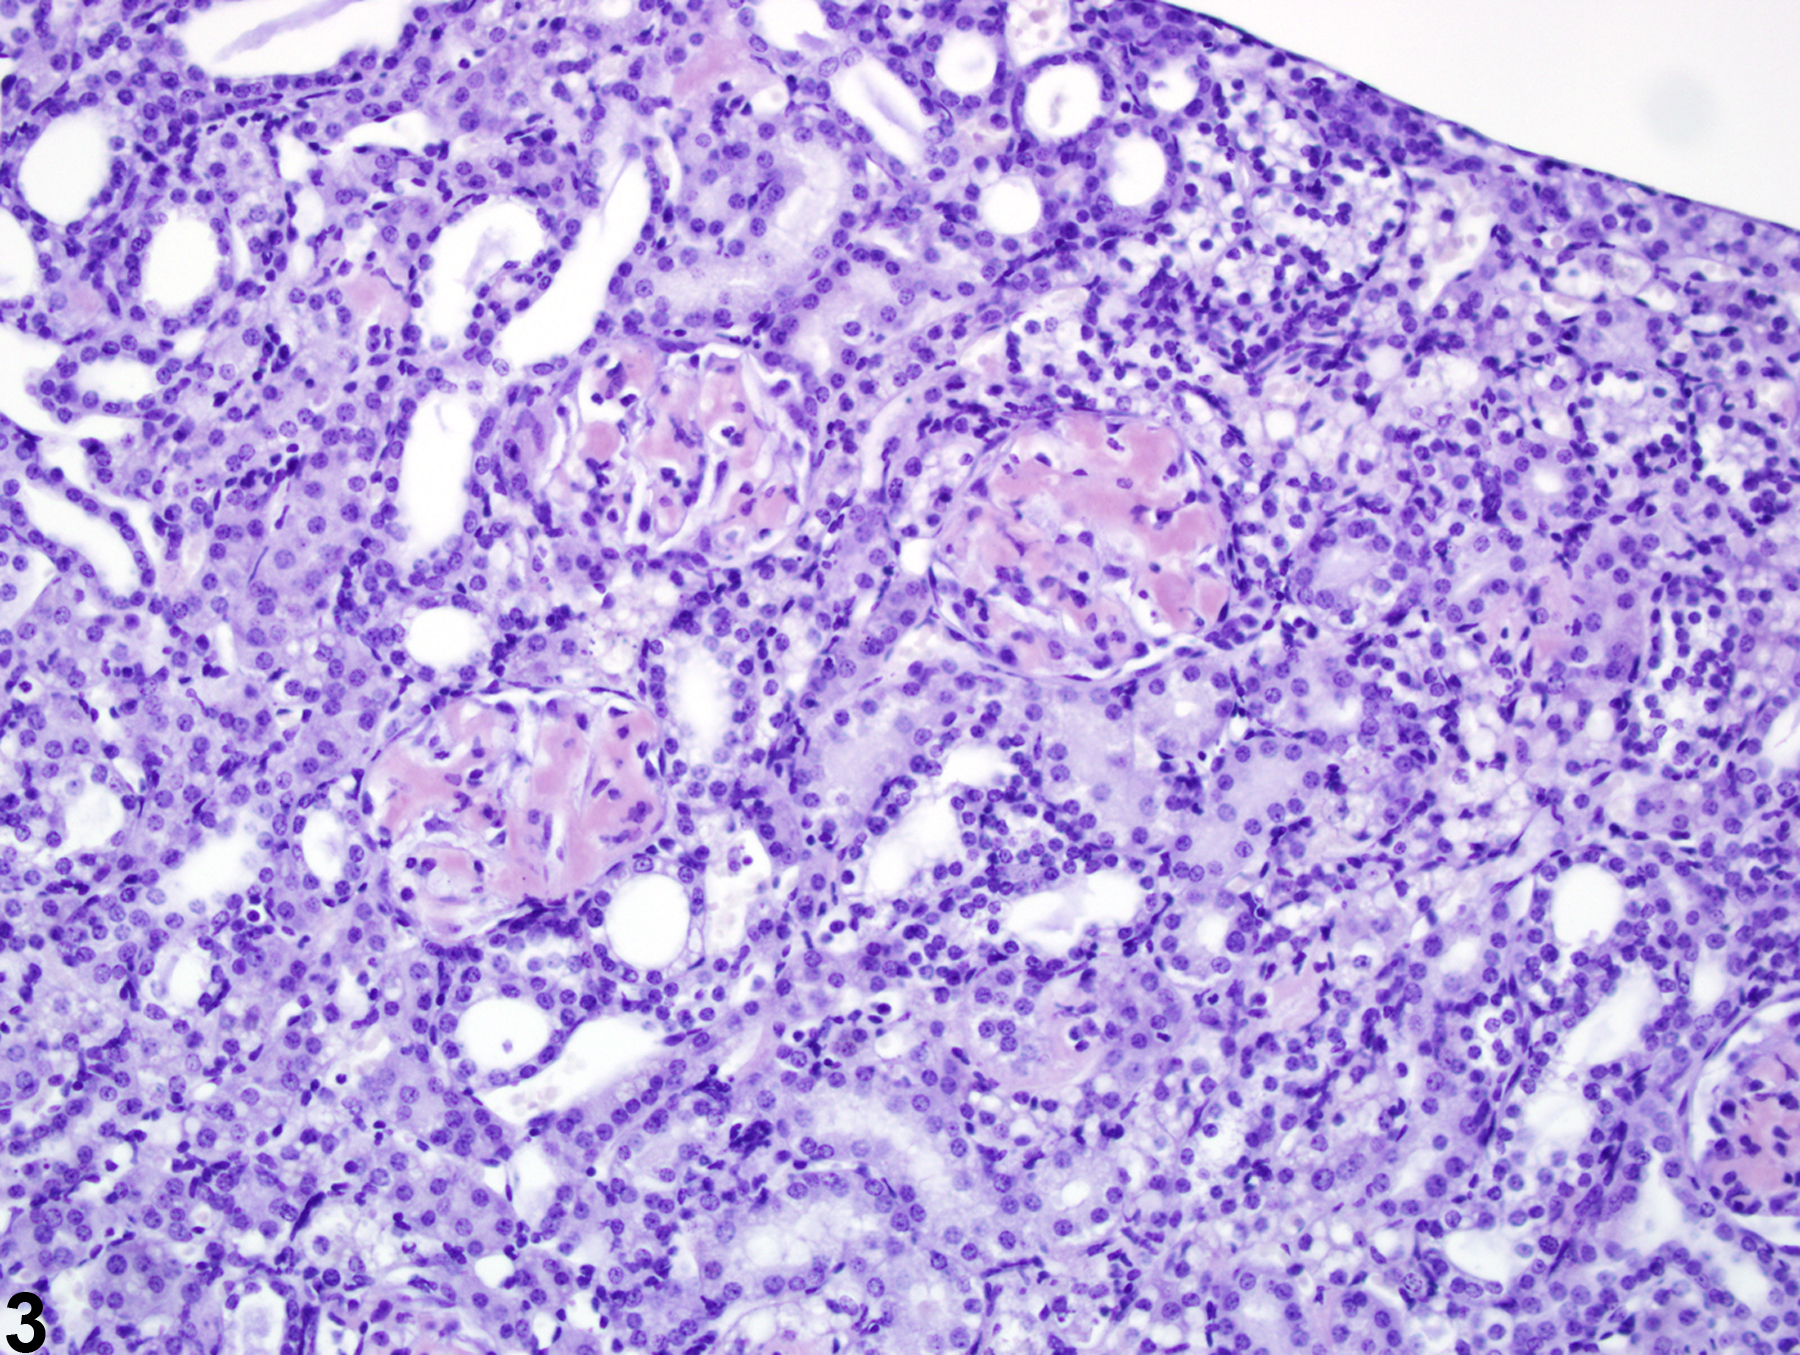 Image of amyloid in the kidney from a  B6C3F1 mouse in a chronic study